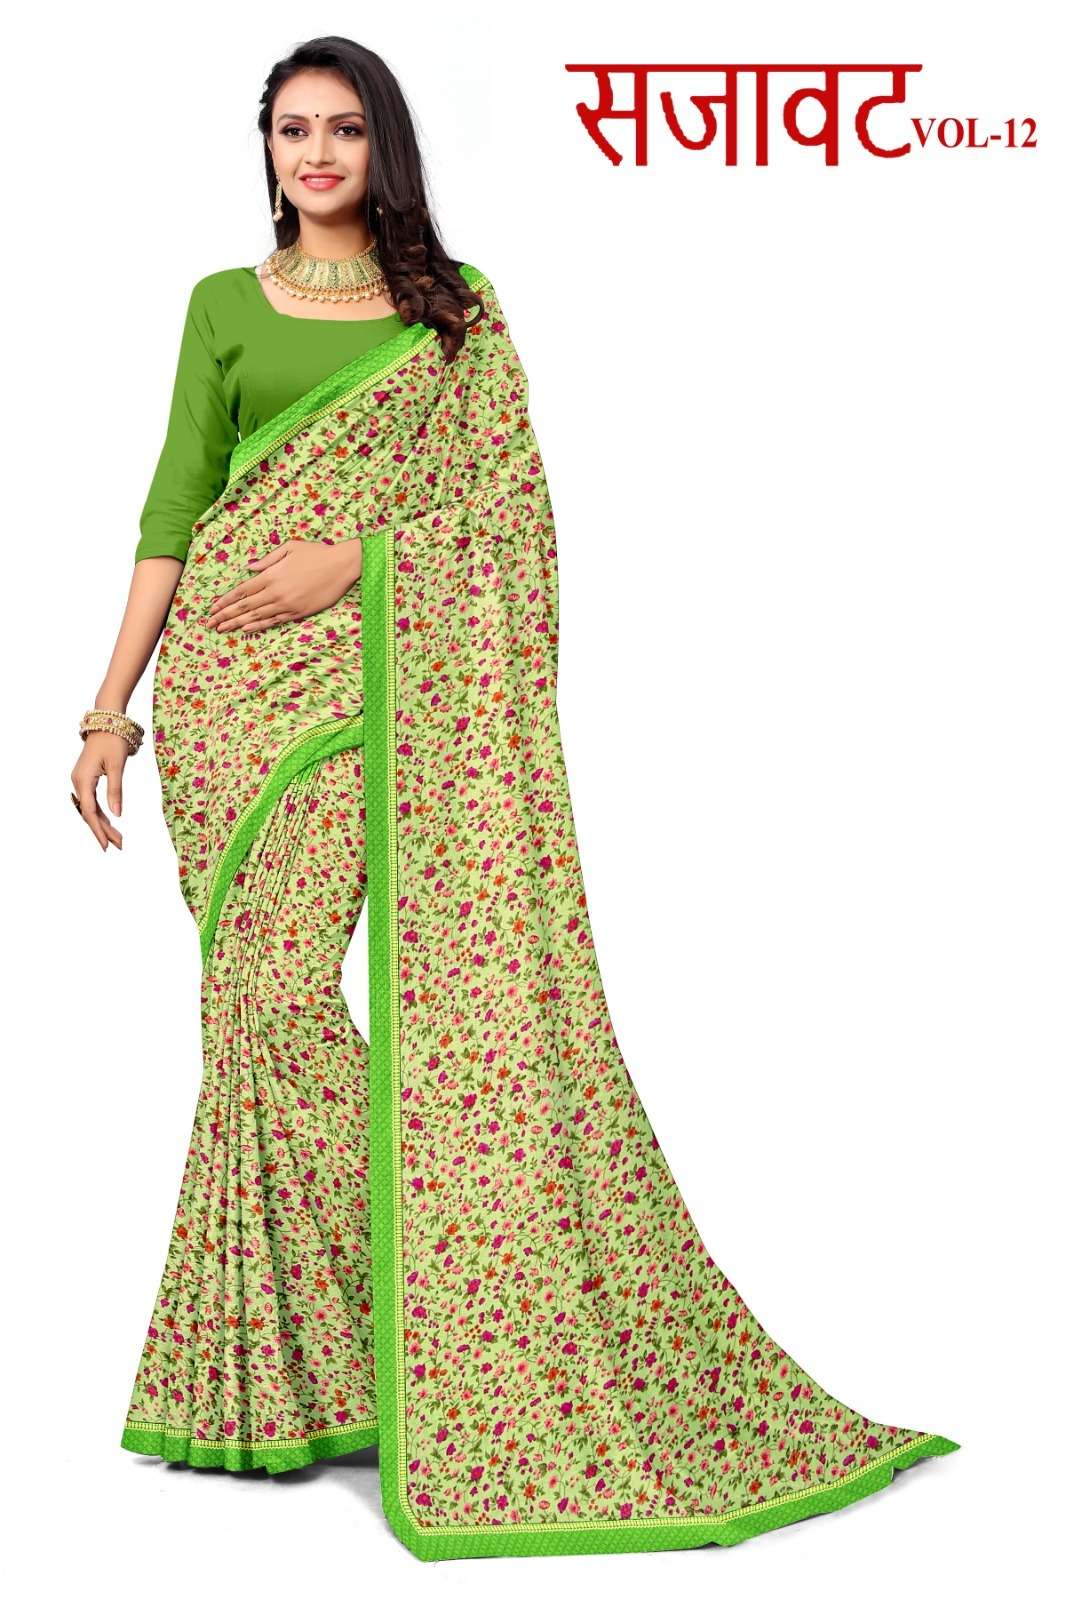 DREAM GIRL VOL-1 BY ASLIWHOLESALE CREPE PRINTED EXCLUSIVE UNIFORM SAREES